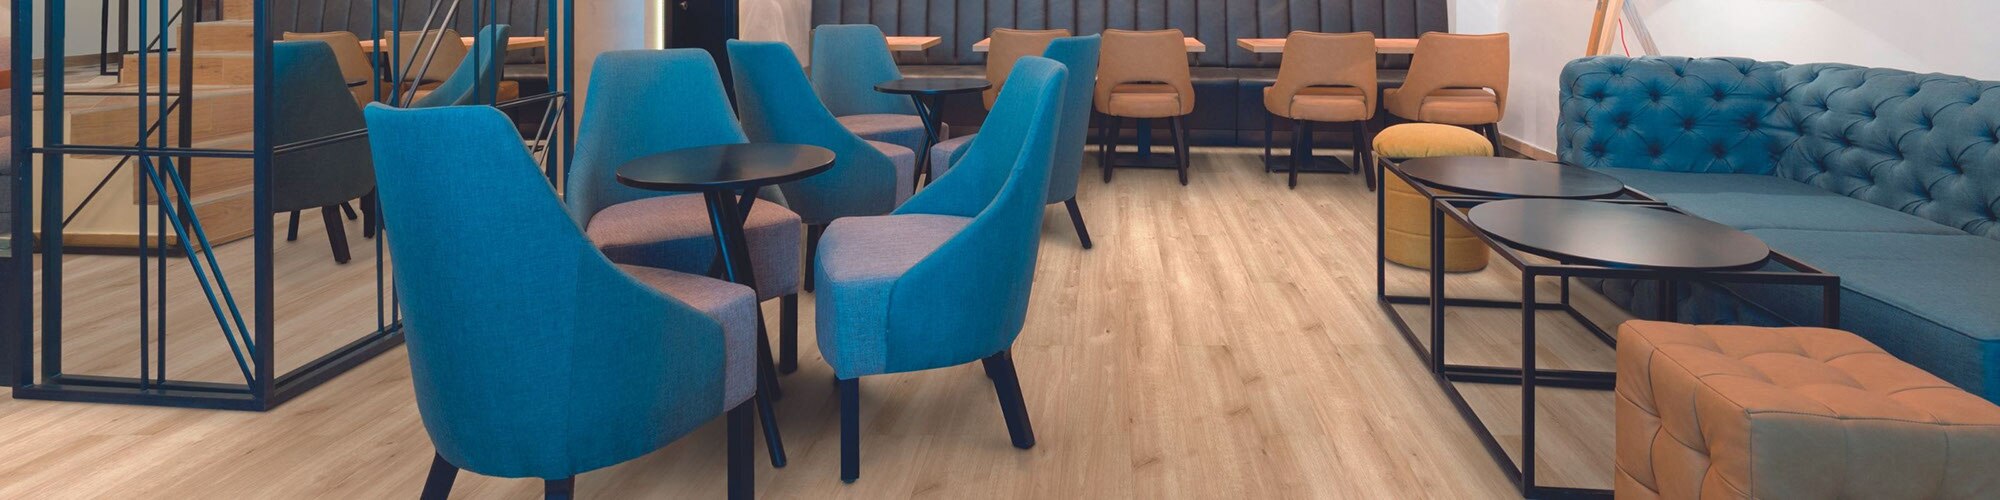 Restaurant dining room with wood look LVT (luxury vinyl tile) flooring, tables and blue cushioned chairs, blue sofa with coffee table and ottoman.